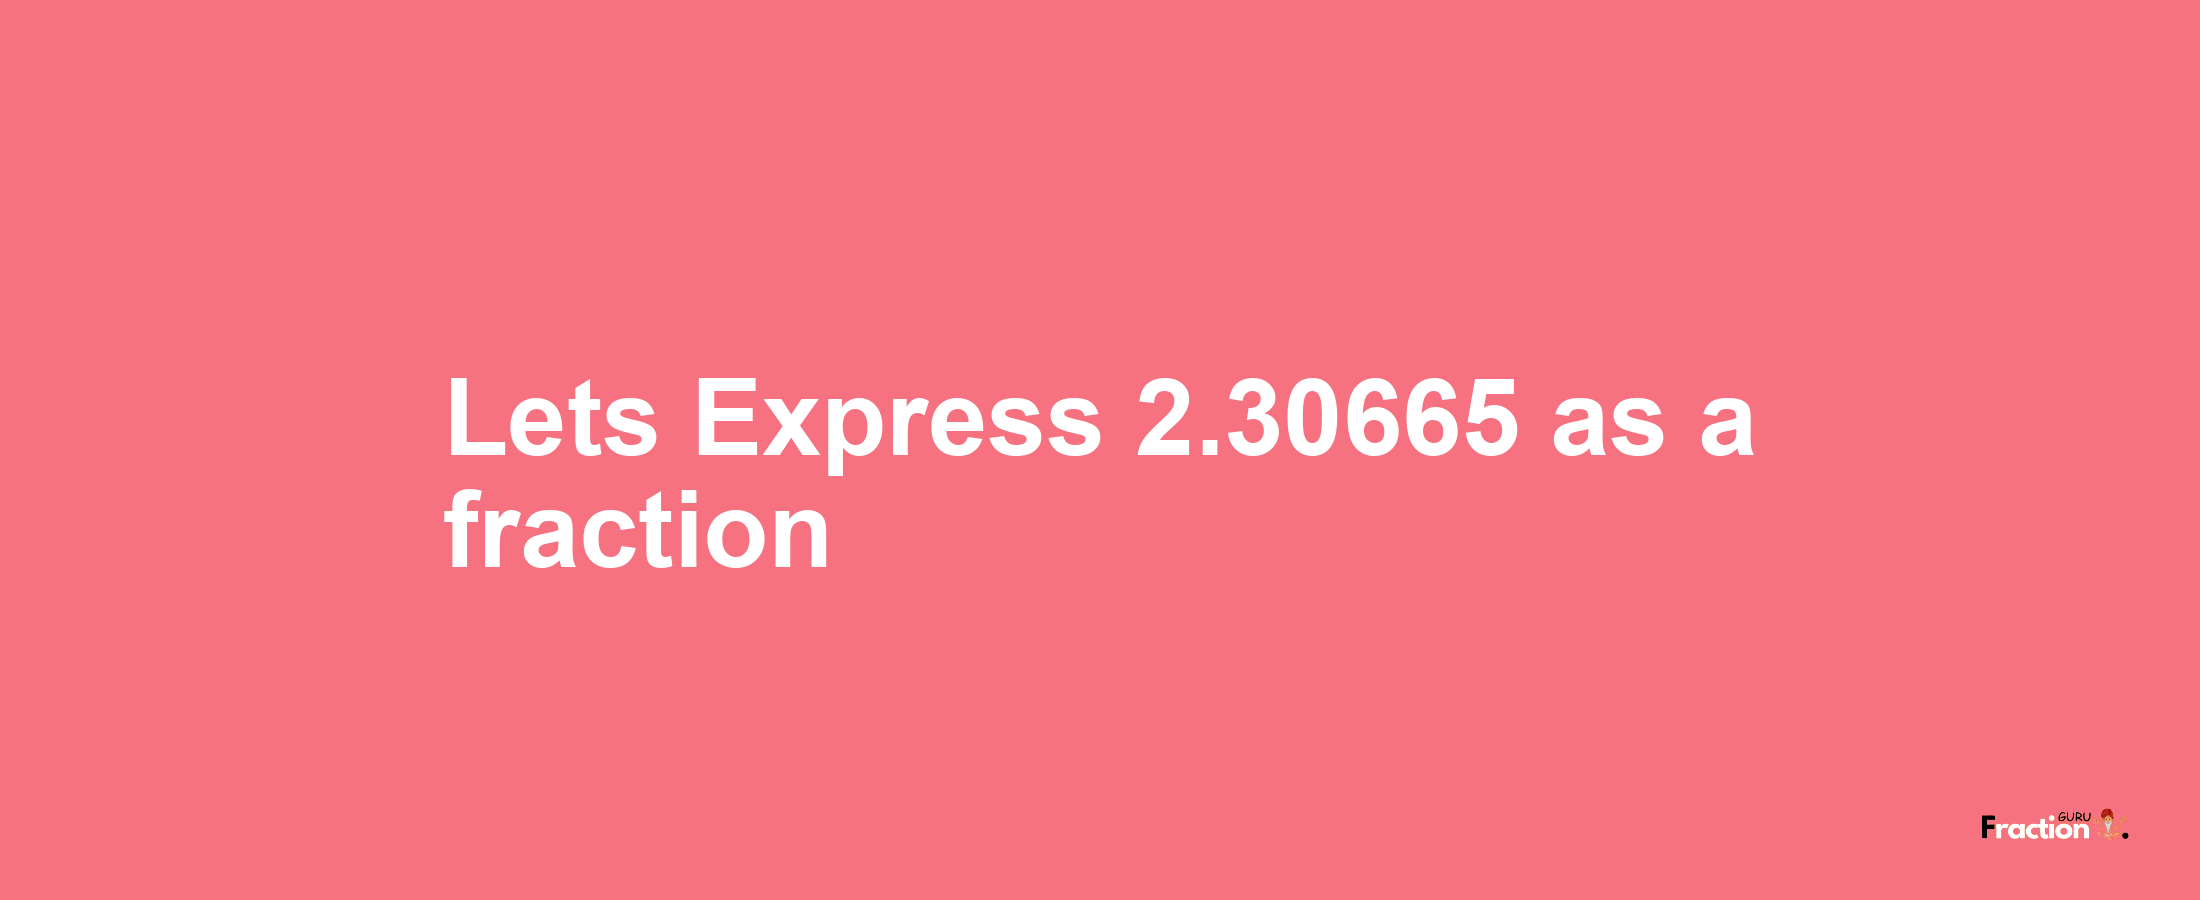 Lets Express 2.30665 as afraction